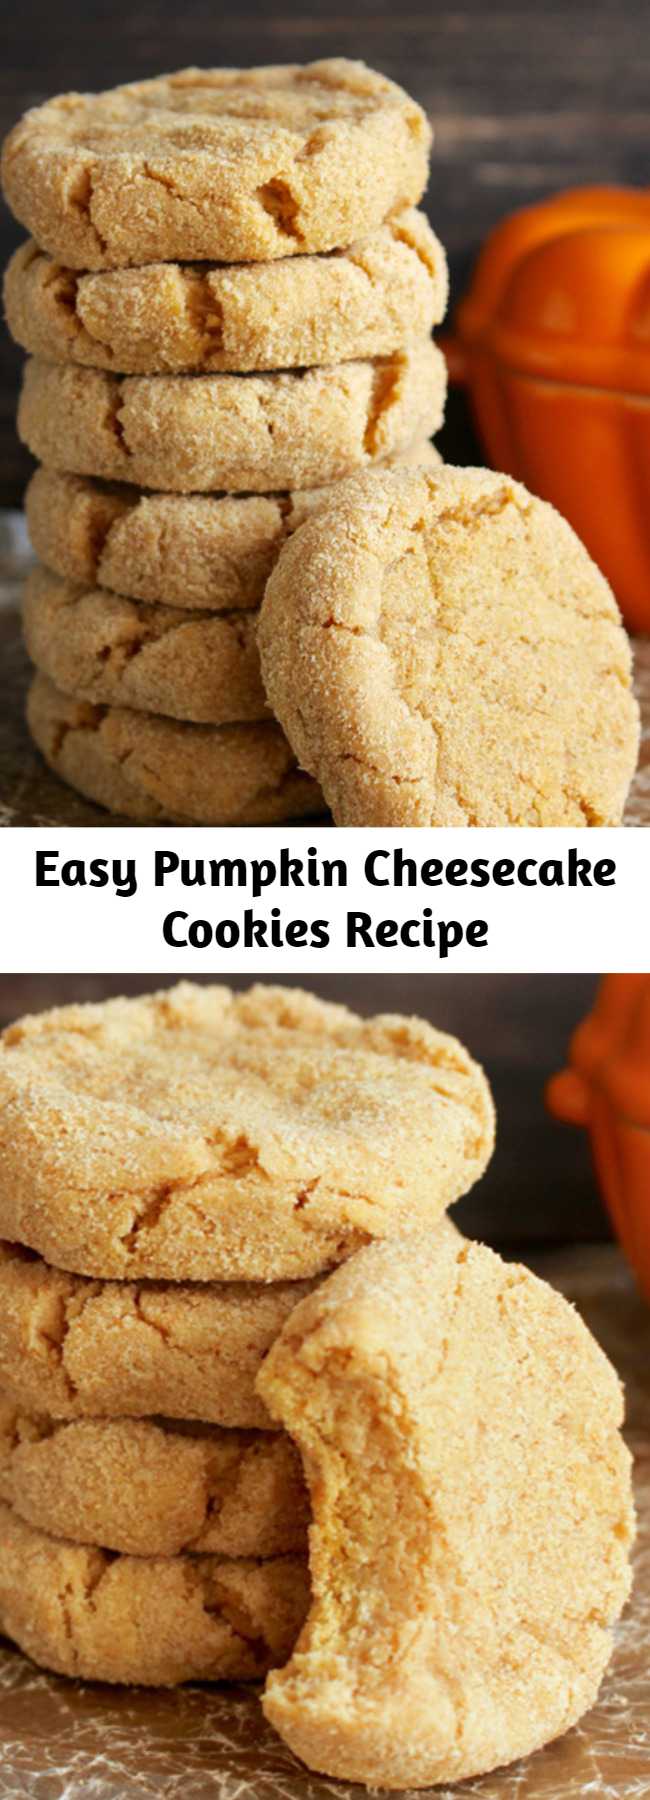 Easy Pumpkin Cheesecake Cookies Recipe - These Pumpkin Cheesecake Cookies are quick to make and will please any pumpkin lover. A soft creamy center with a graham cracker coating- these are the perfect treat!